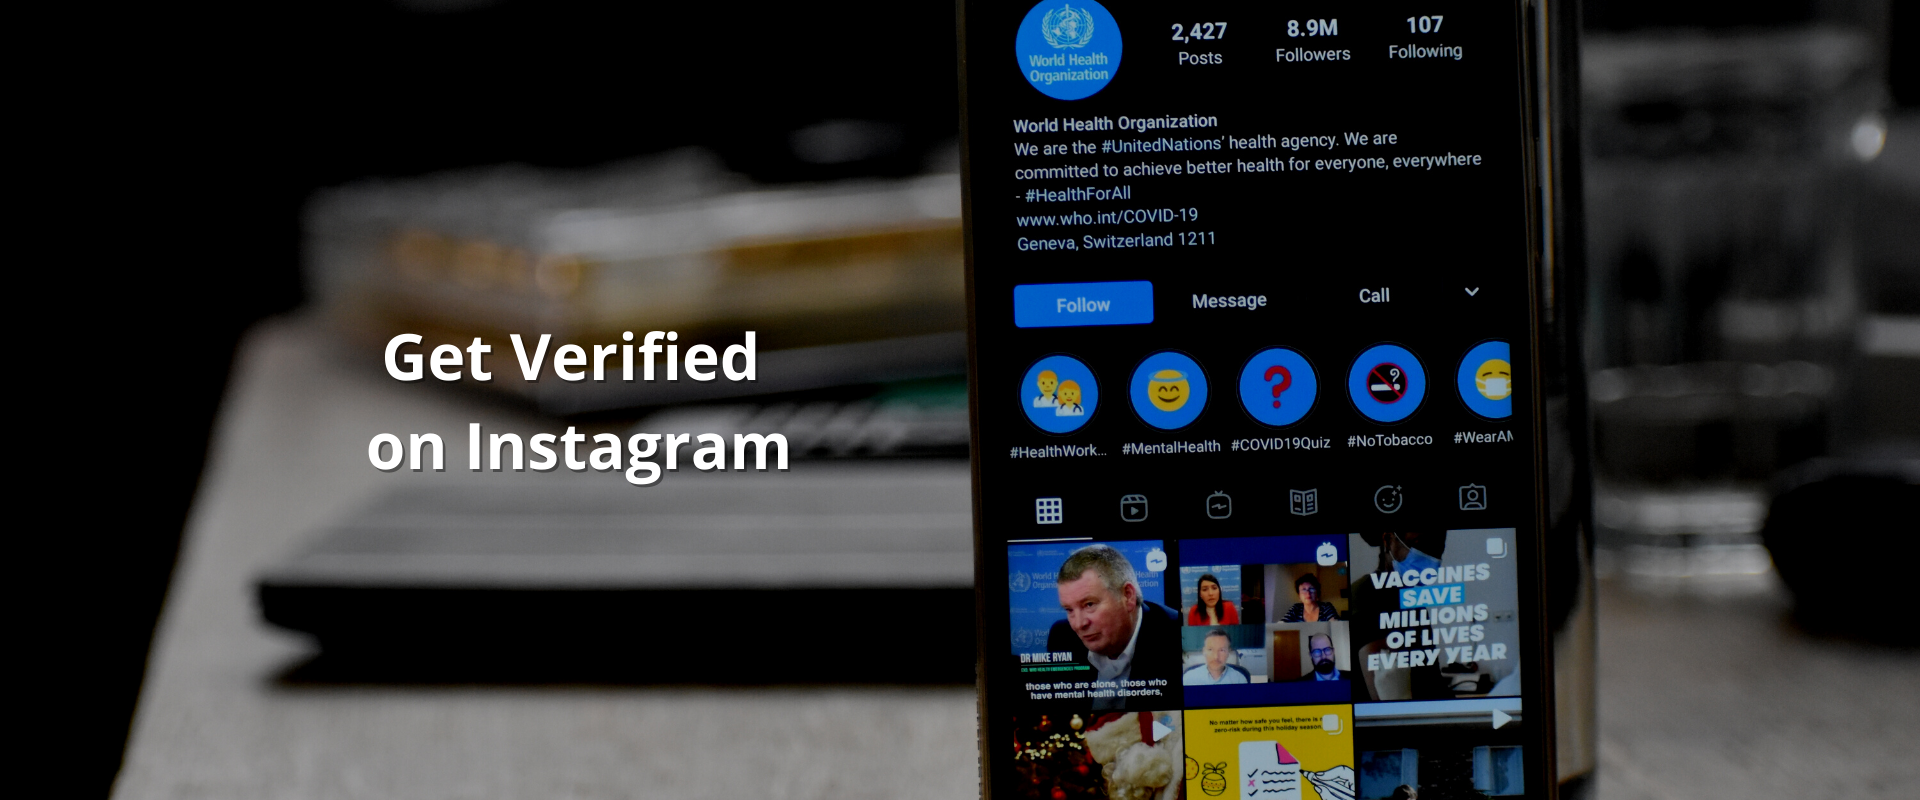 How to get verified on Instagram – Guide to VIP Account Instagram